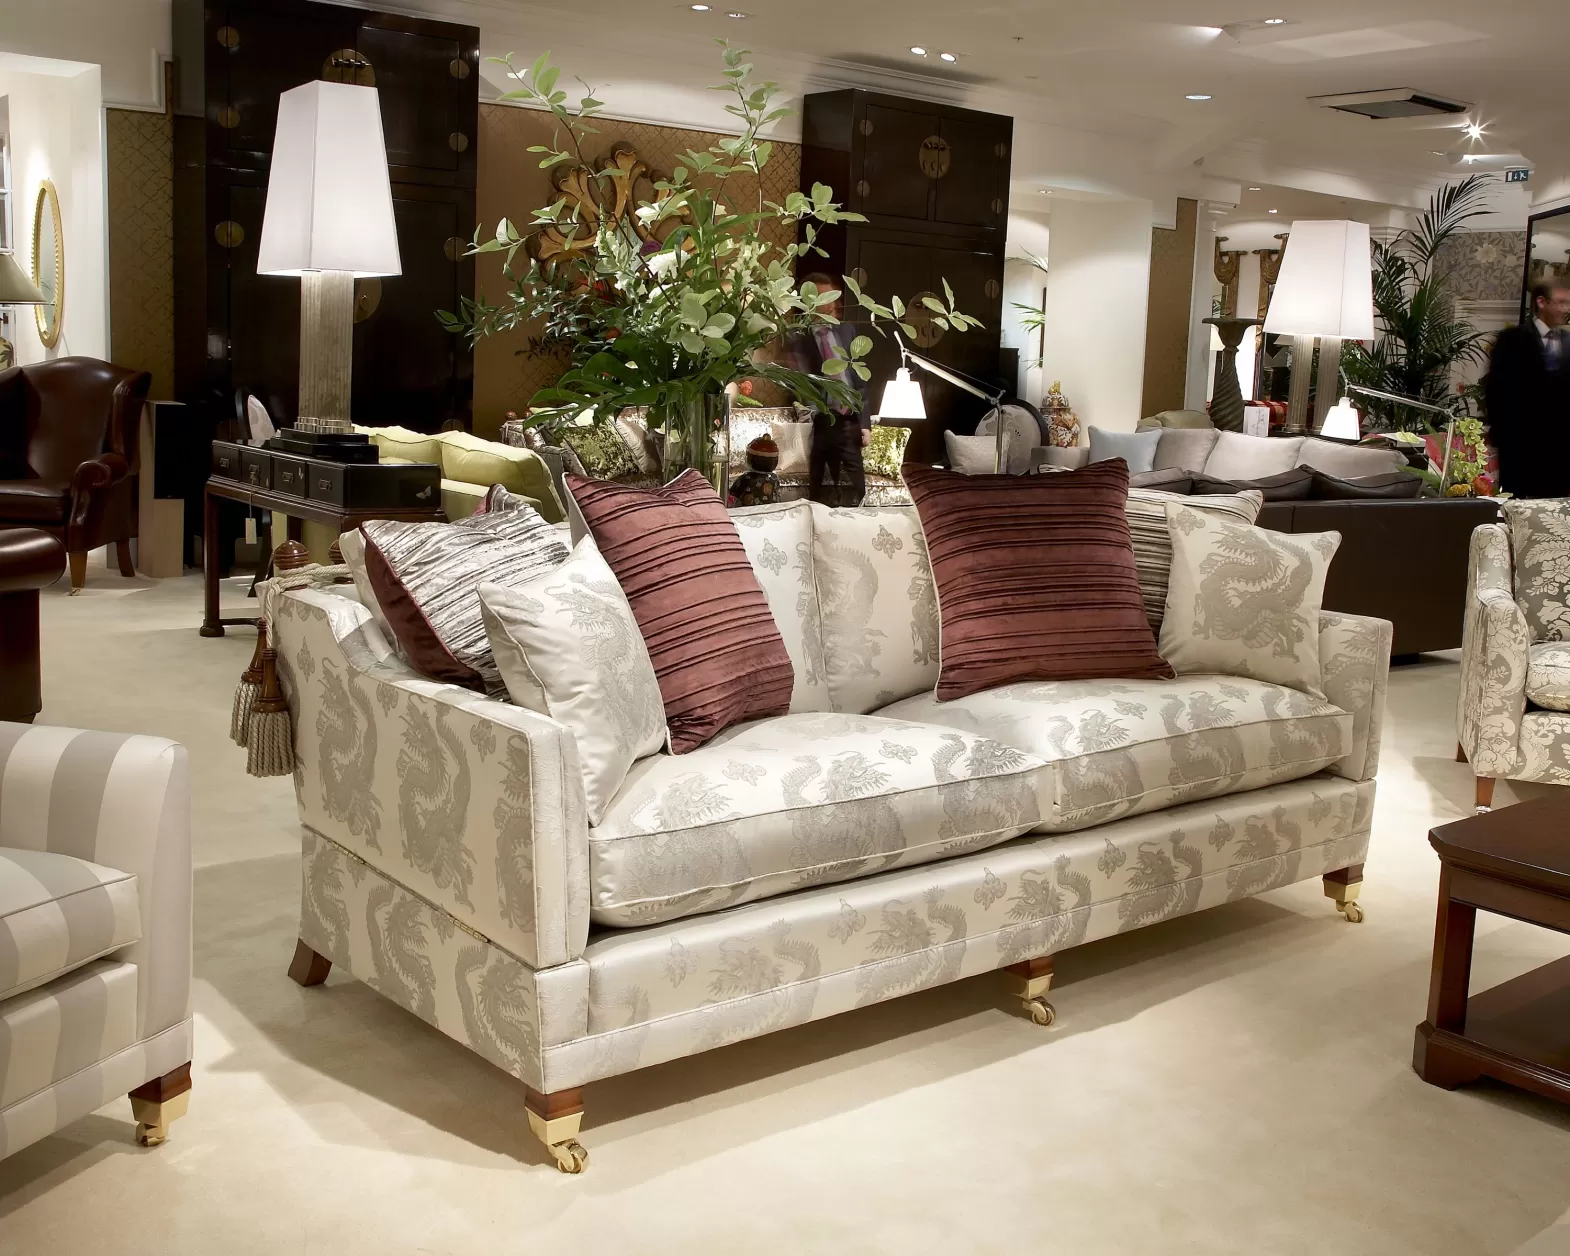 Step into the world of luxury with Duresta, now more accessible than ever with our exclusive clearance deals at Roomes. Celebrated for their intricate designs and stellar workmanship, Duresta pieces redefine opulence. Whether you're on the hunt for a grand sofa or an exquisite accent chair, our Duresta clearance range delivers unparalleled excellence at unbeatable prices. This is your golden chance to infuse your home with the premium touch of Duresta's renowned craftsmanship without the premium price tag. Dive in and make a sophisticated statement today.

At present we don't have anu Duresta clearance items. We do have an exciting new Duresta collection coming soon.
